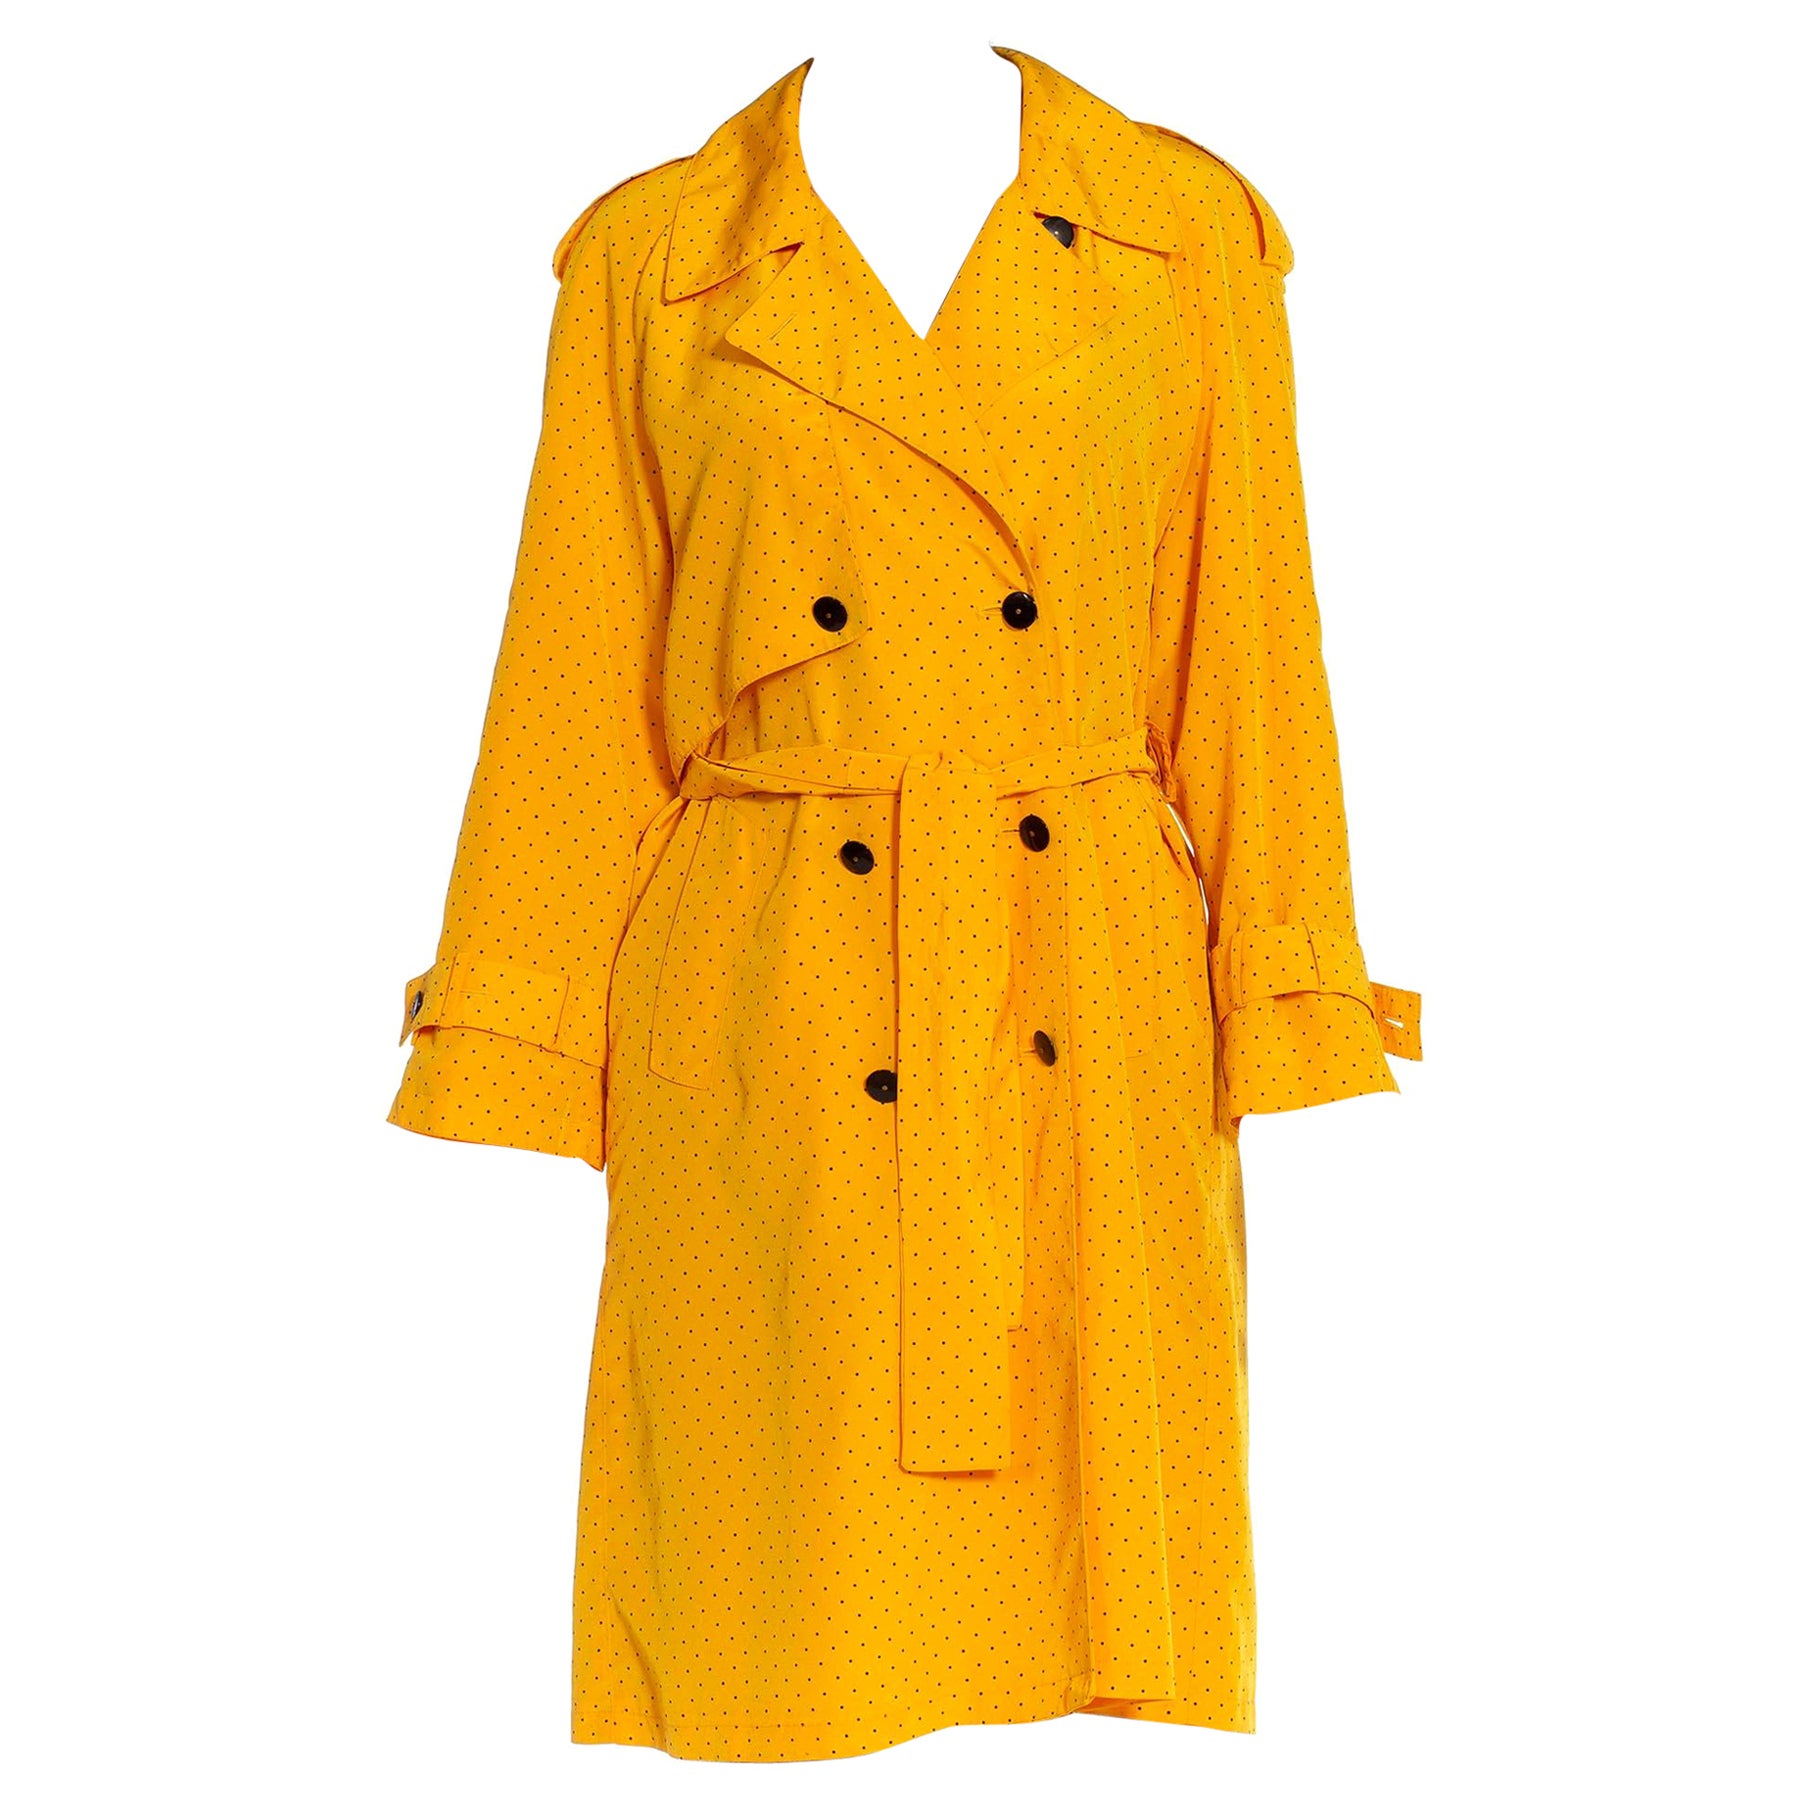 1980S Yellow & Black Polka Dot Double Breast Trench Coat With Pockets